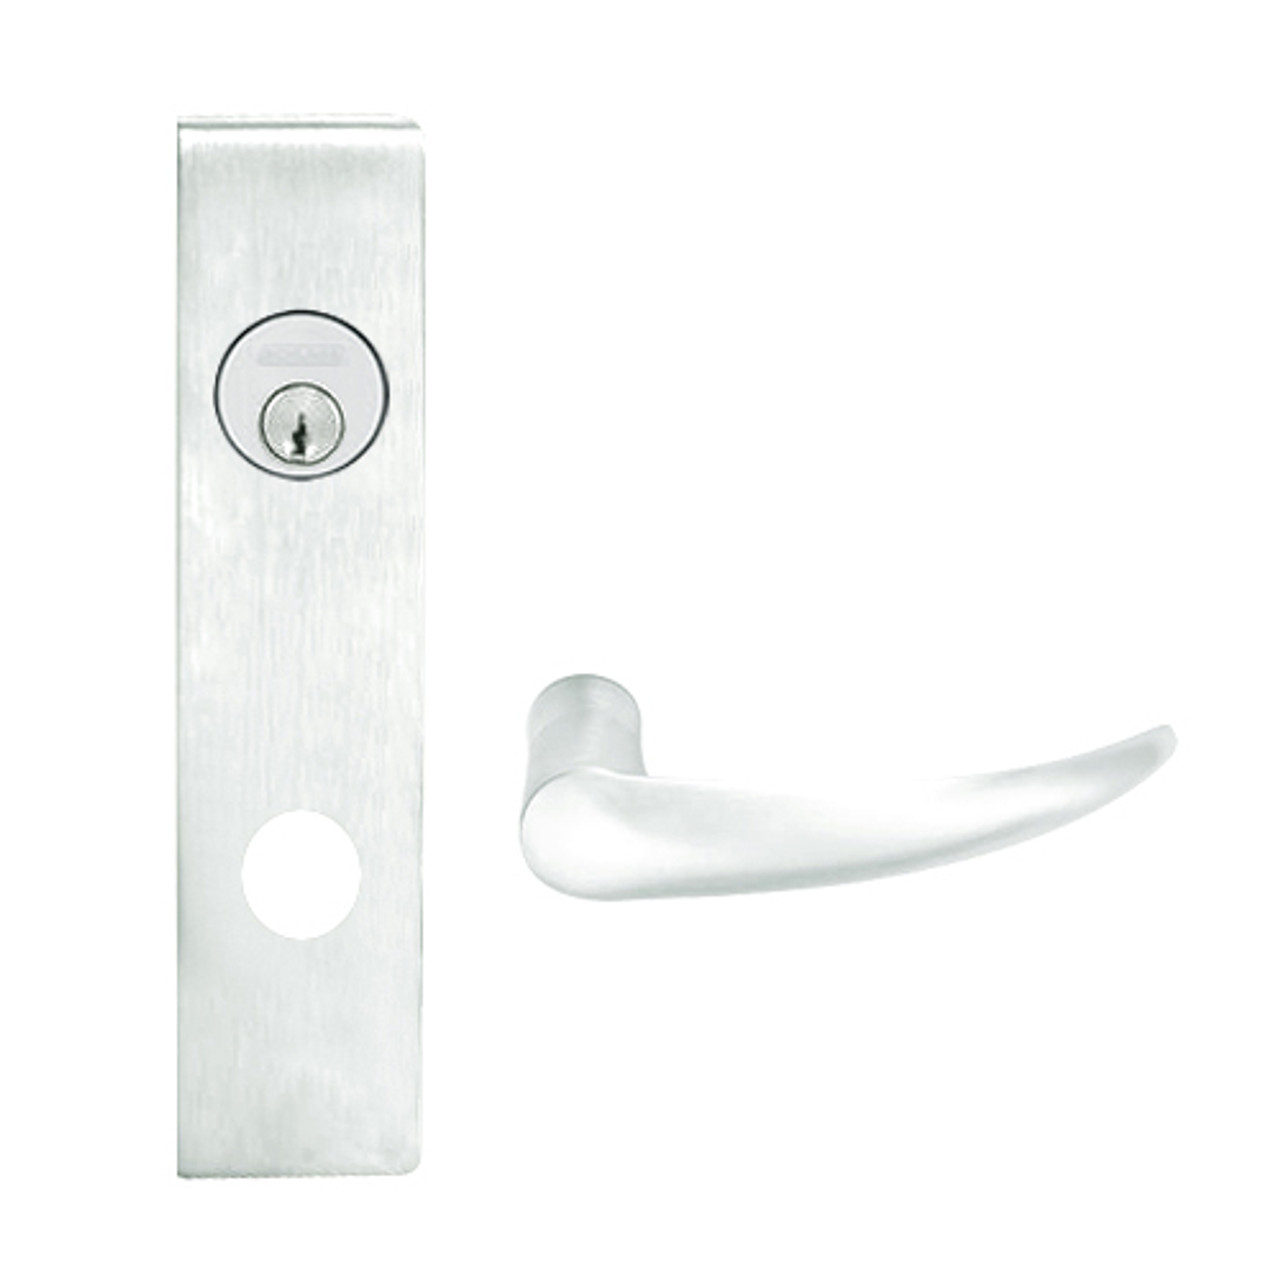 L9026P-OME-L-619 Schlage L Series Exit Lock with Cylinder Commercial Mortise Lock with Omega Lever Design in Satin Nickel